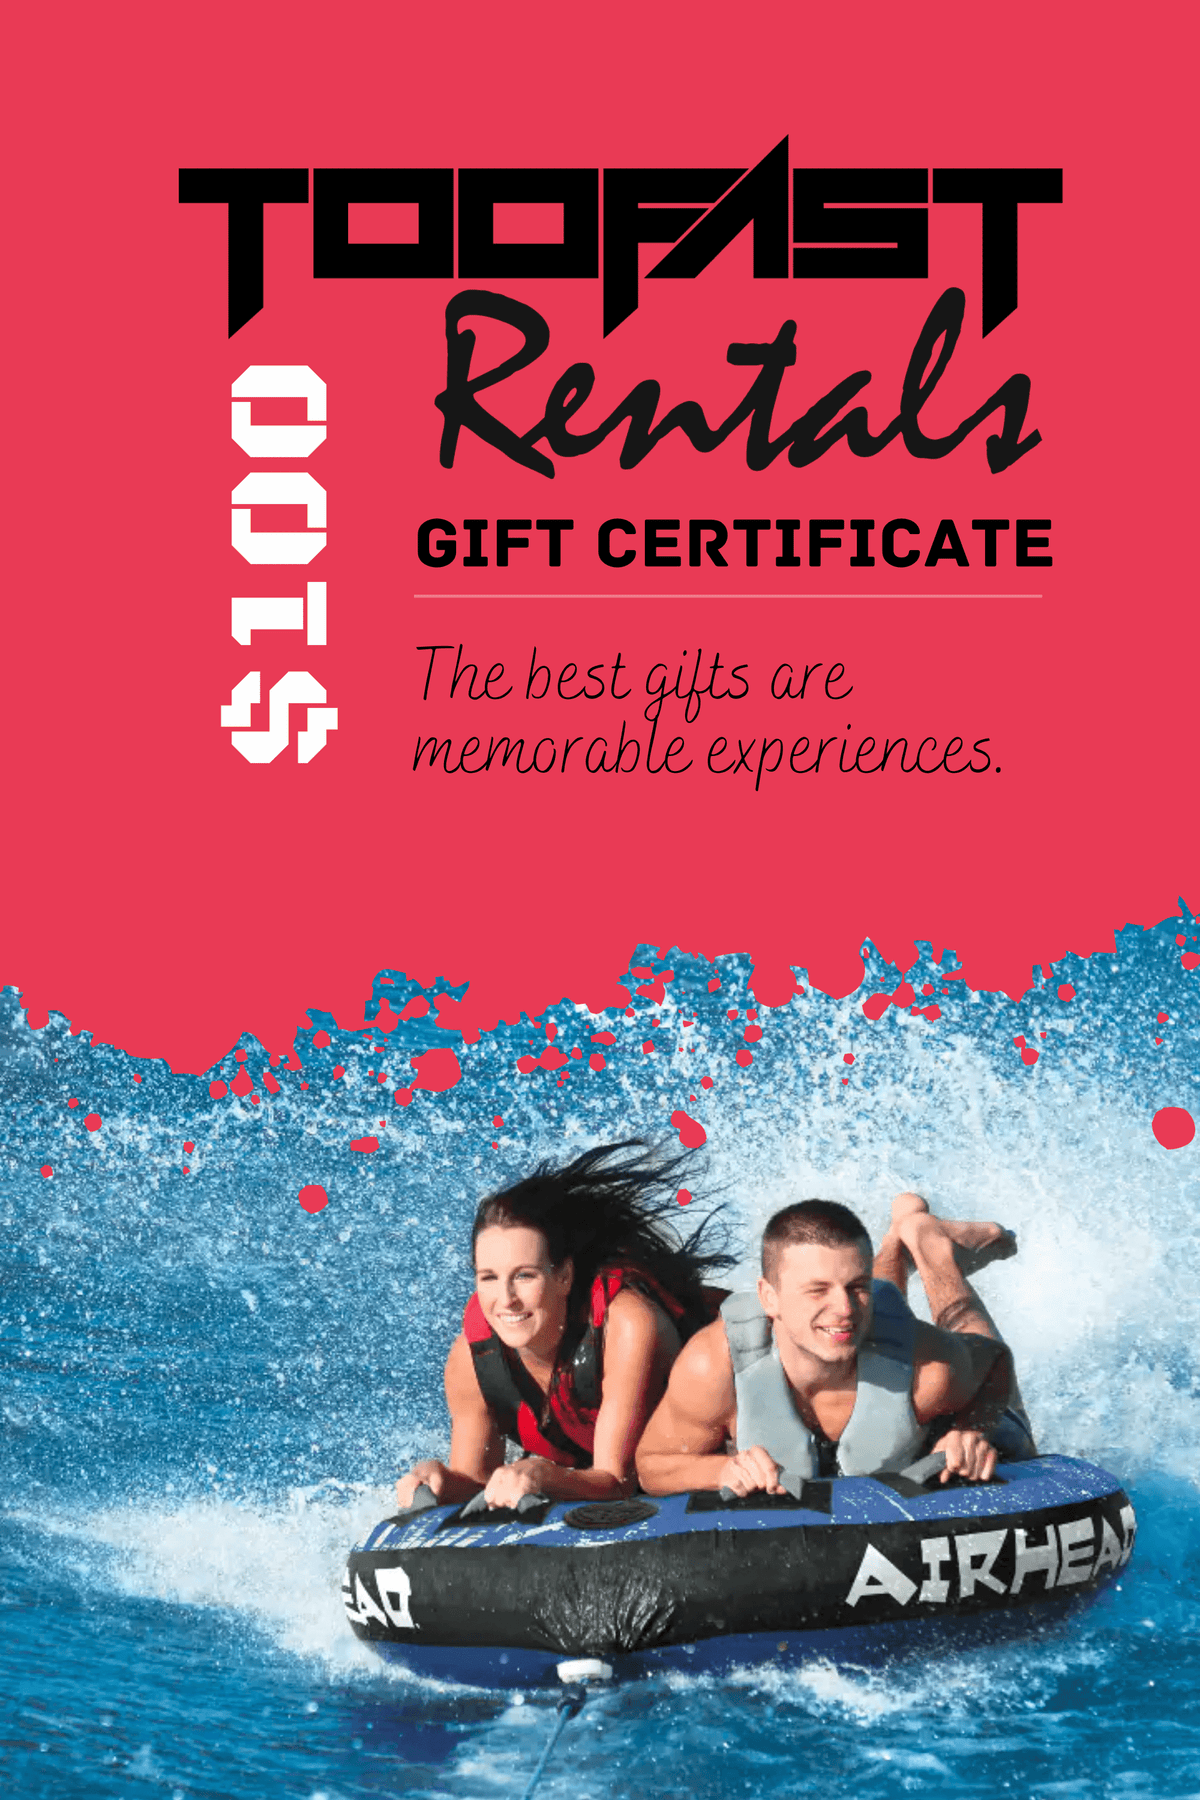 Too Fast Rentals Gift Certificates - Too Fast Rentals